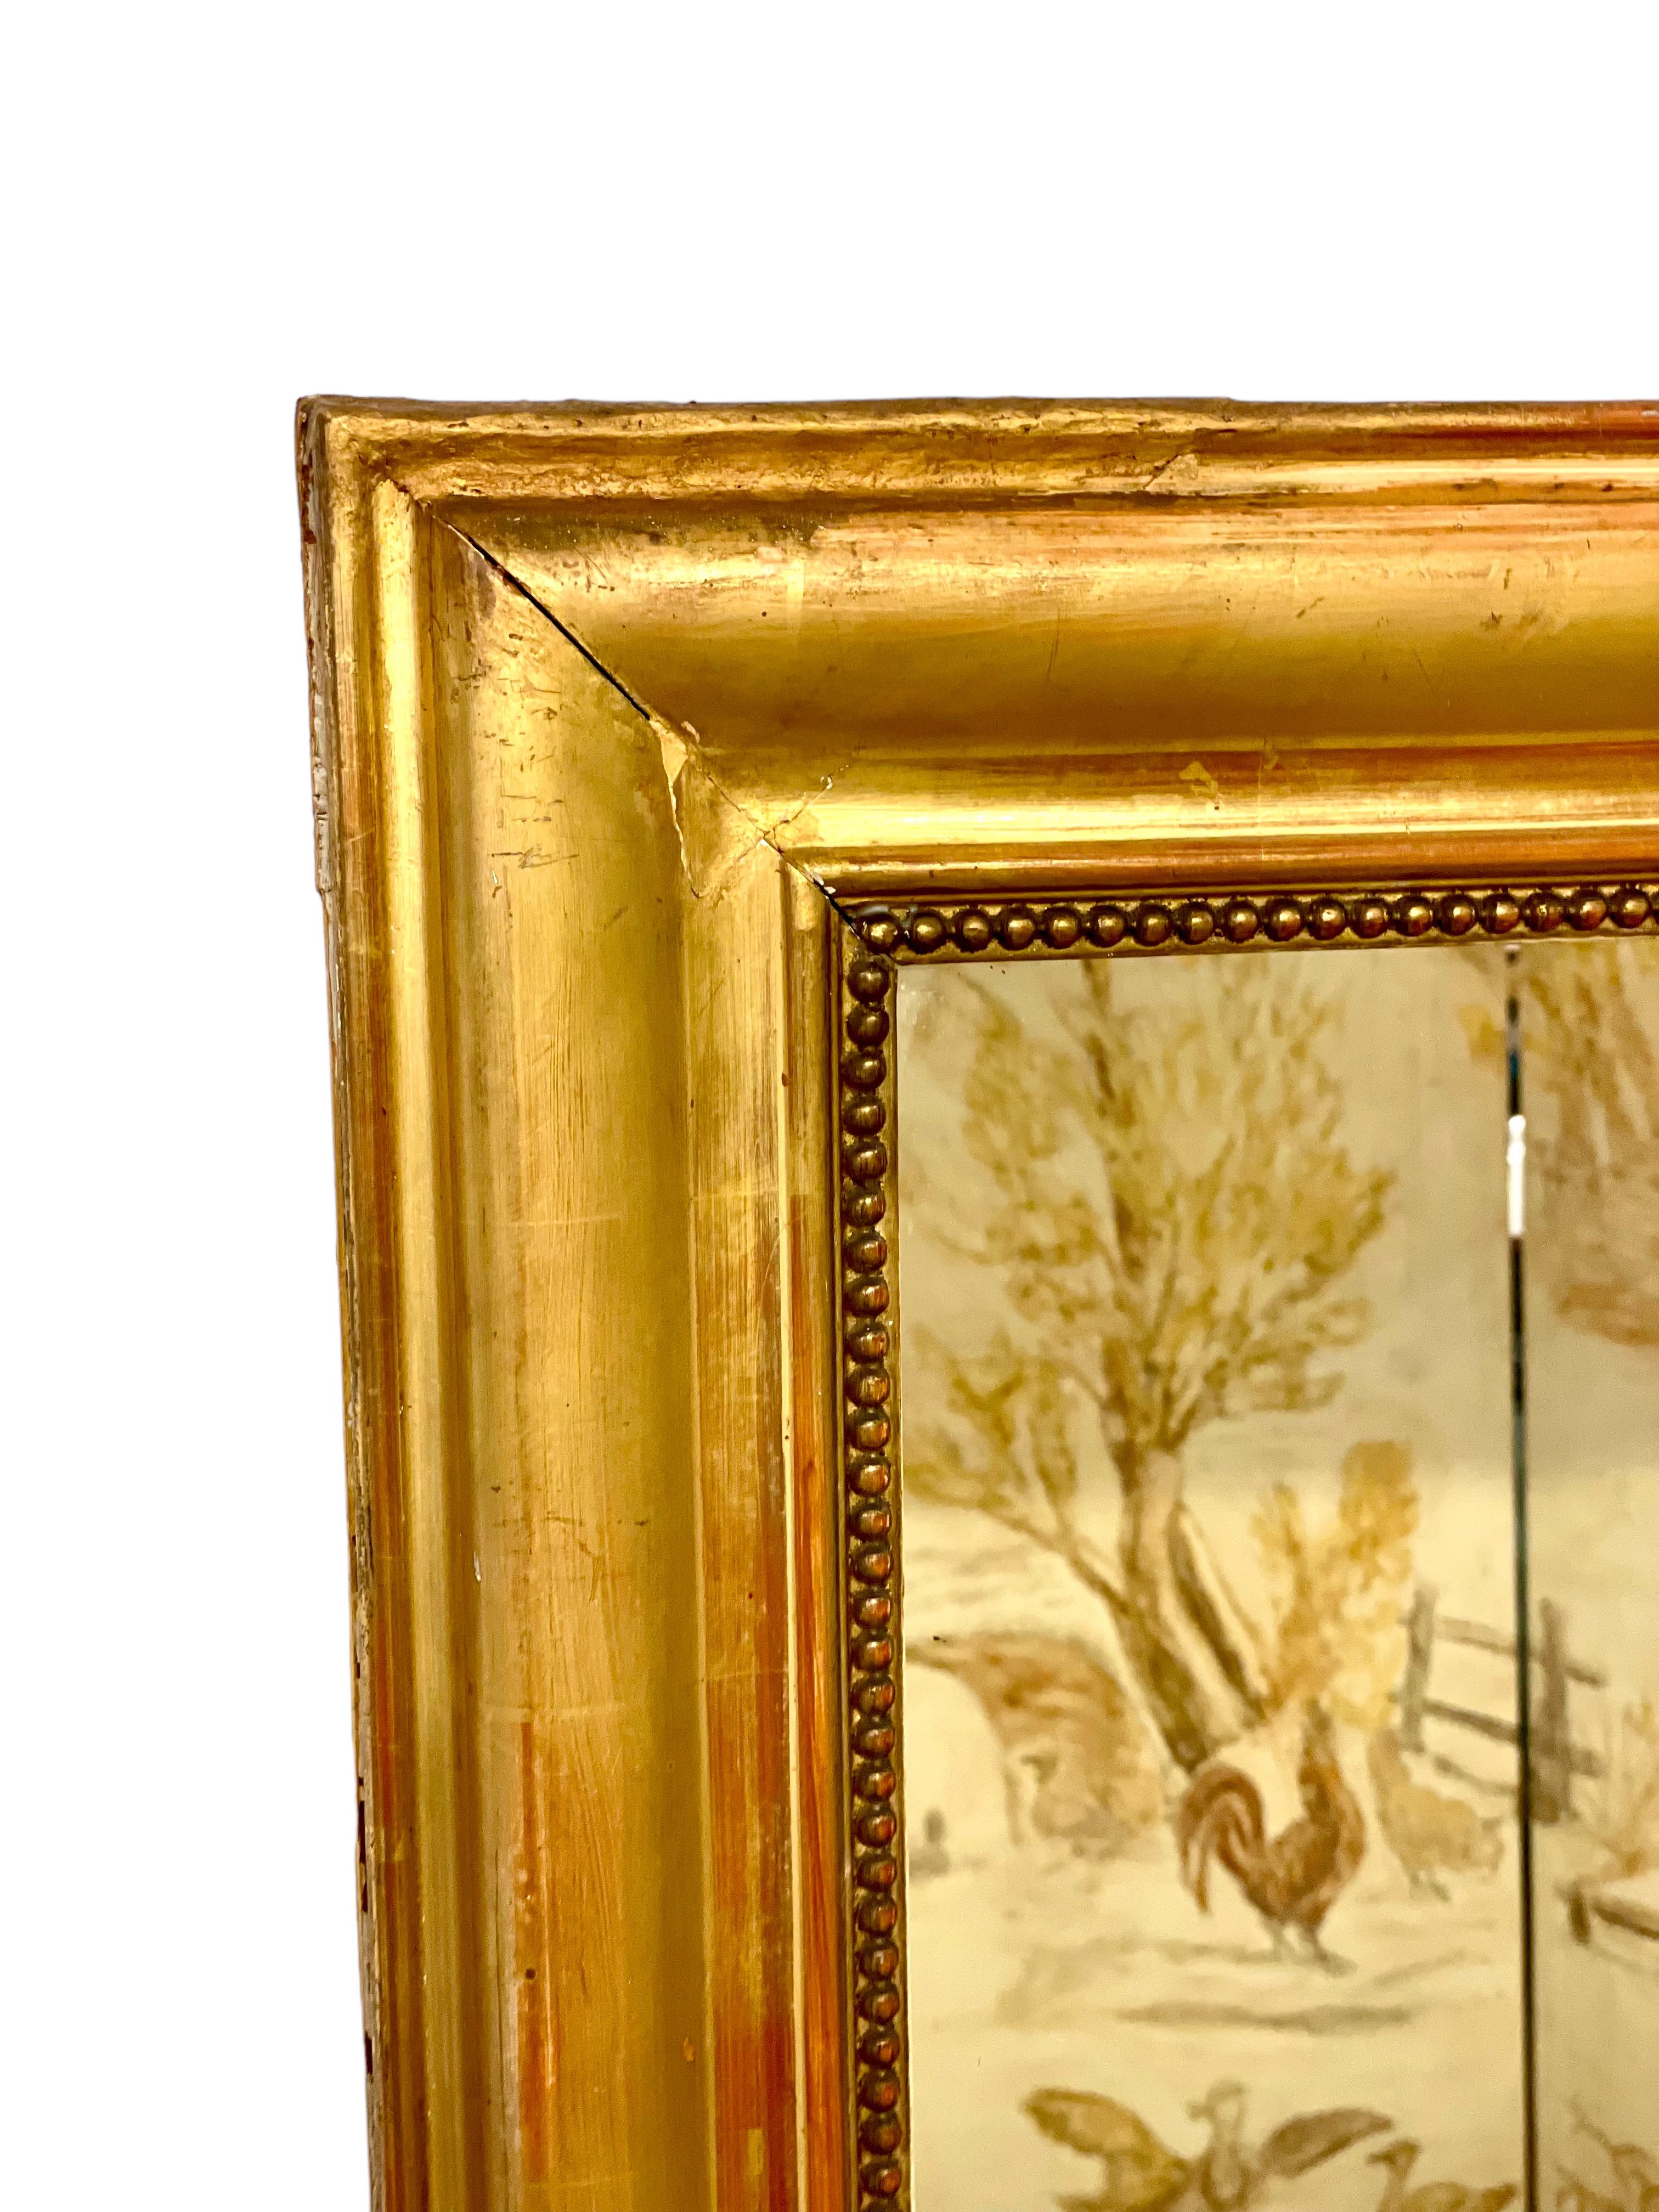 19th Century French Neoclassical Giltwood Trumeau Mirror For Sale 2